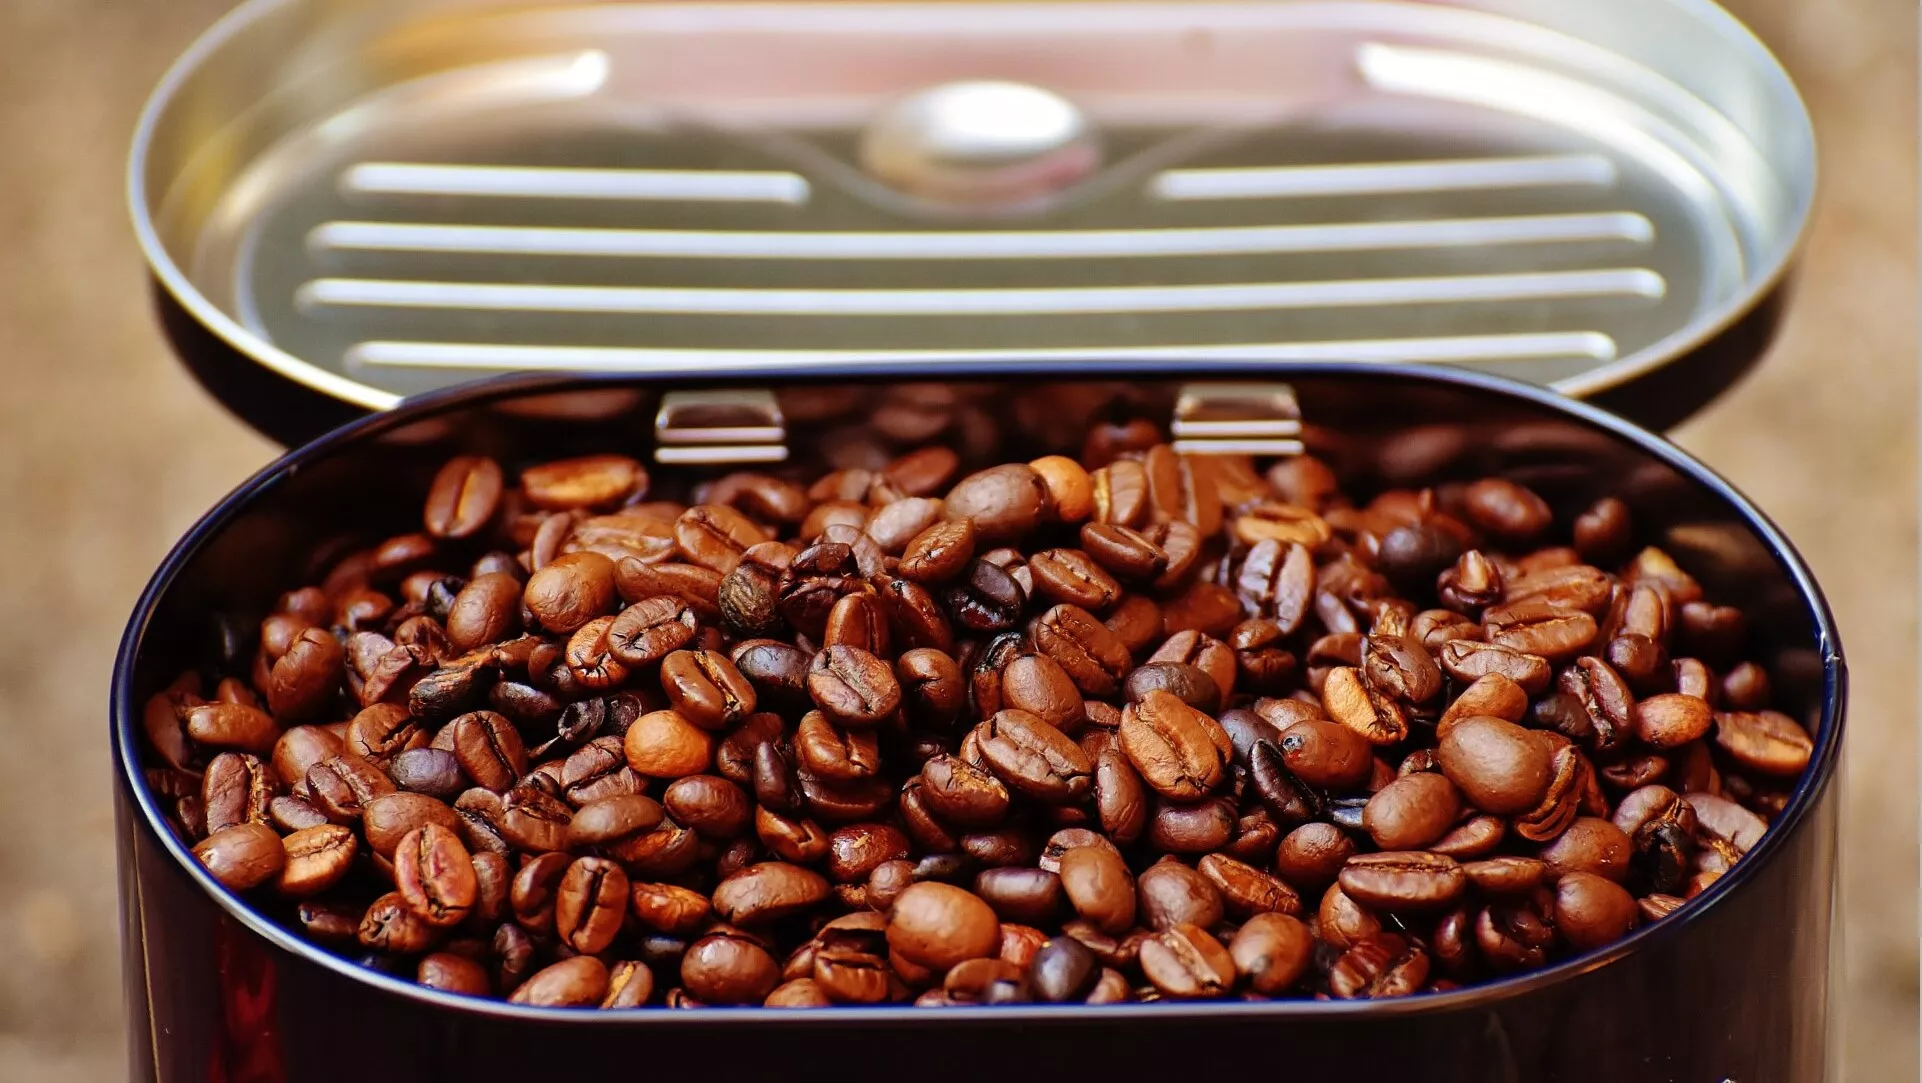 How to Store Coffee Beans to Maintain Freshness